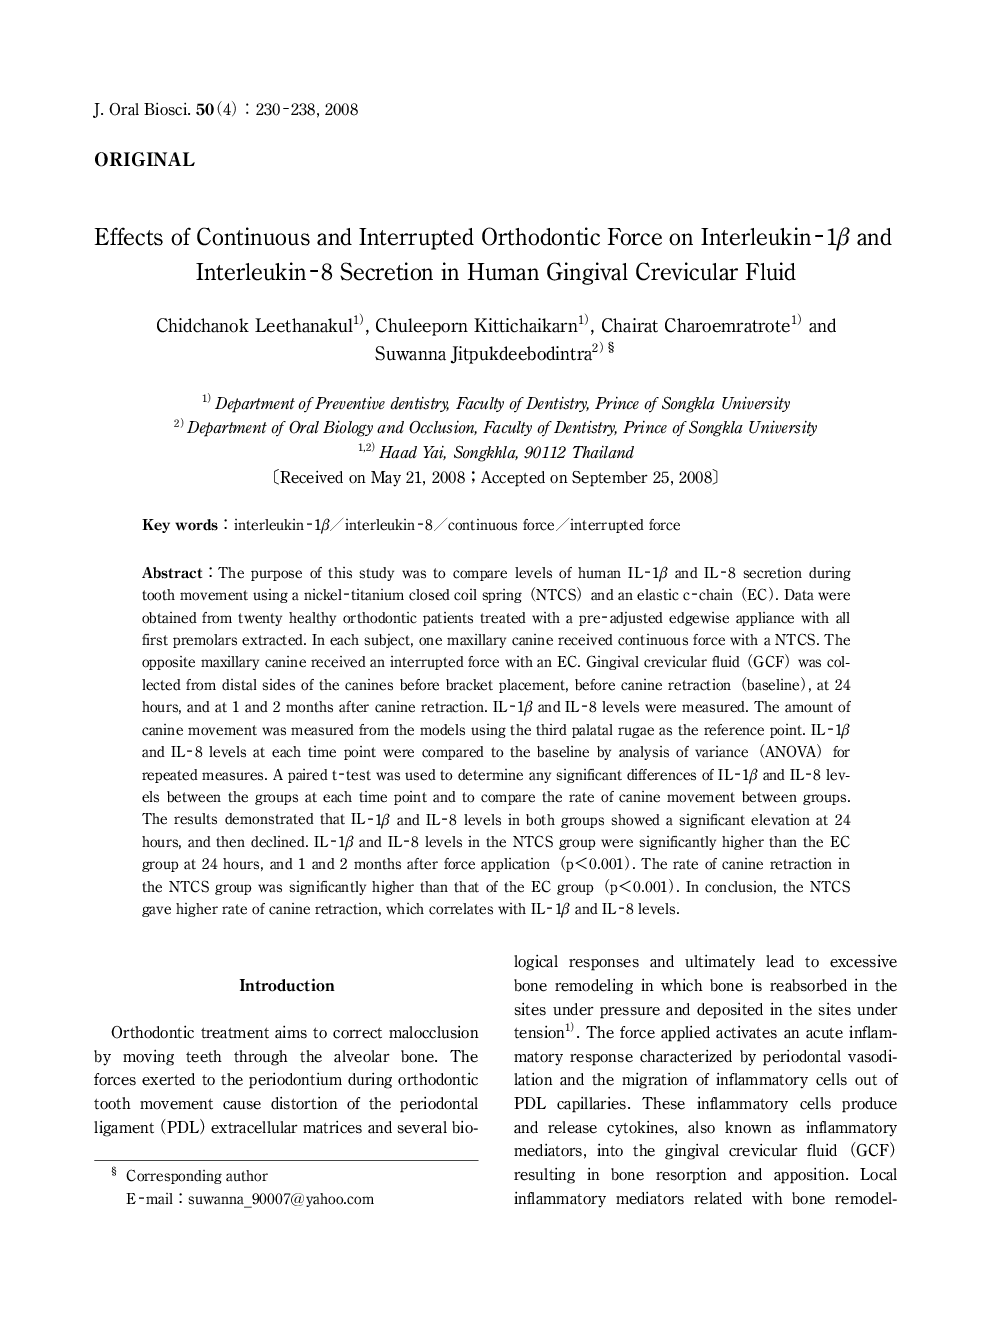 Effects of Continuous and Interrupted Orthodontic Force on Interleukin-1β and Interleukin-8 Secretion in Human Gingival Crevicular Fluid